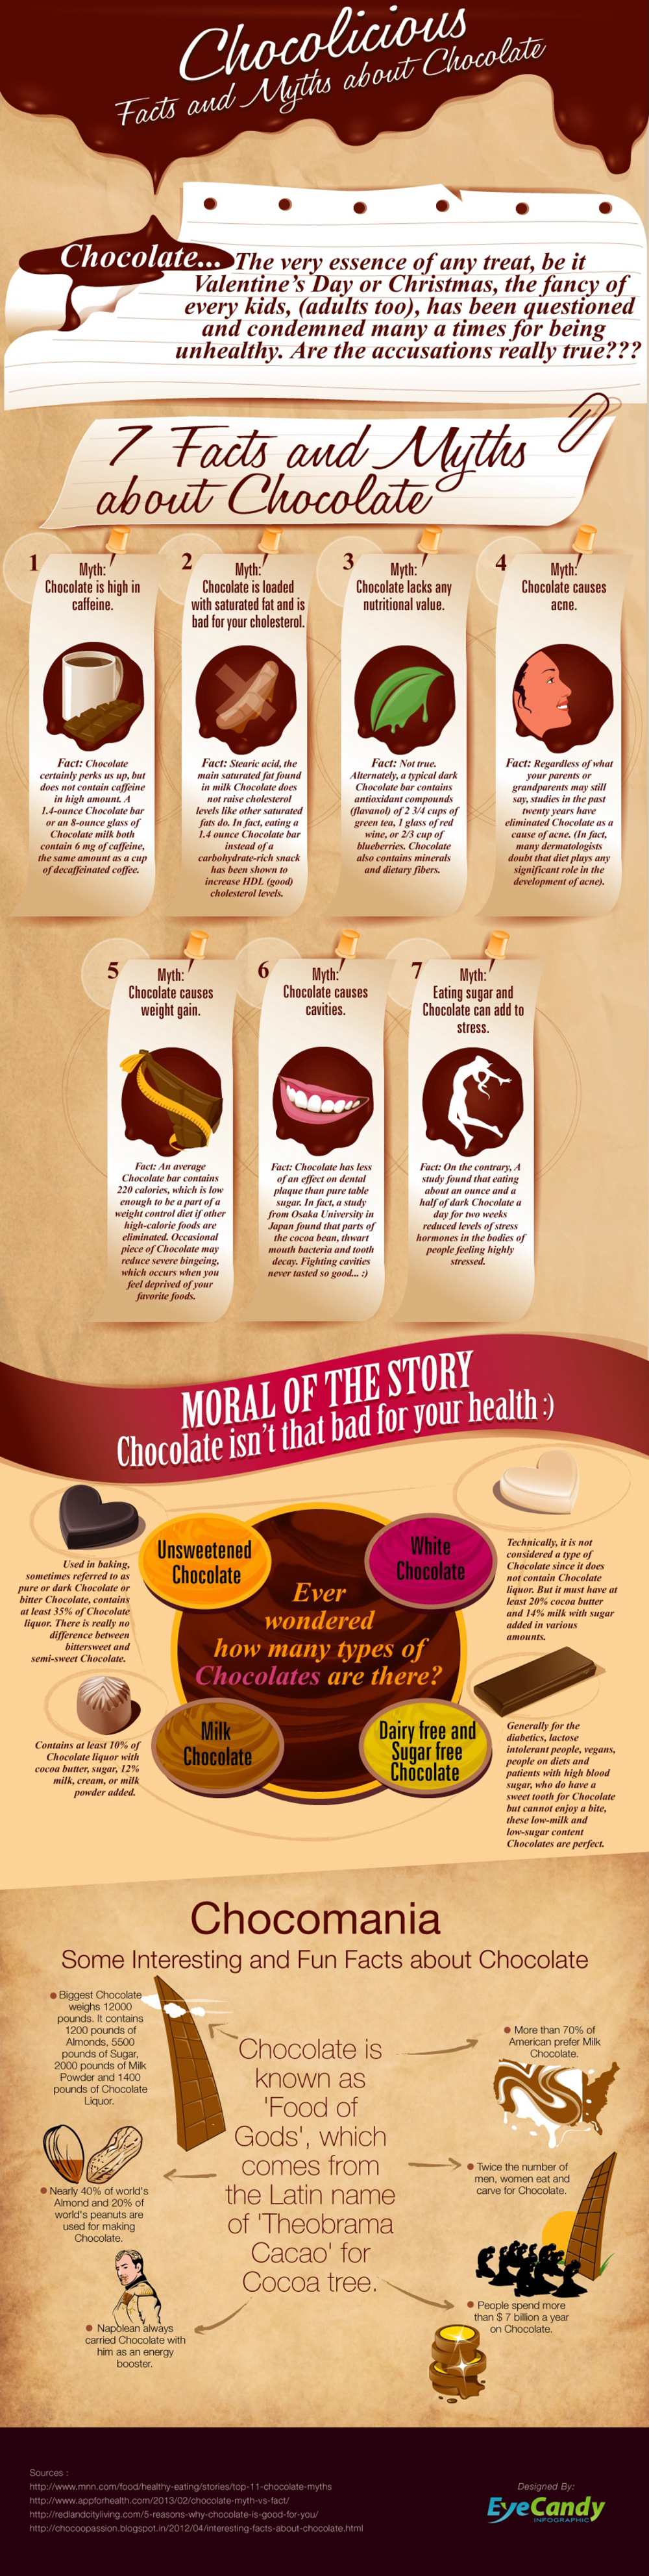 chocolicious--facts-and-myths-about-chocolate_517a89353ca85_w1500